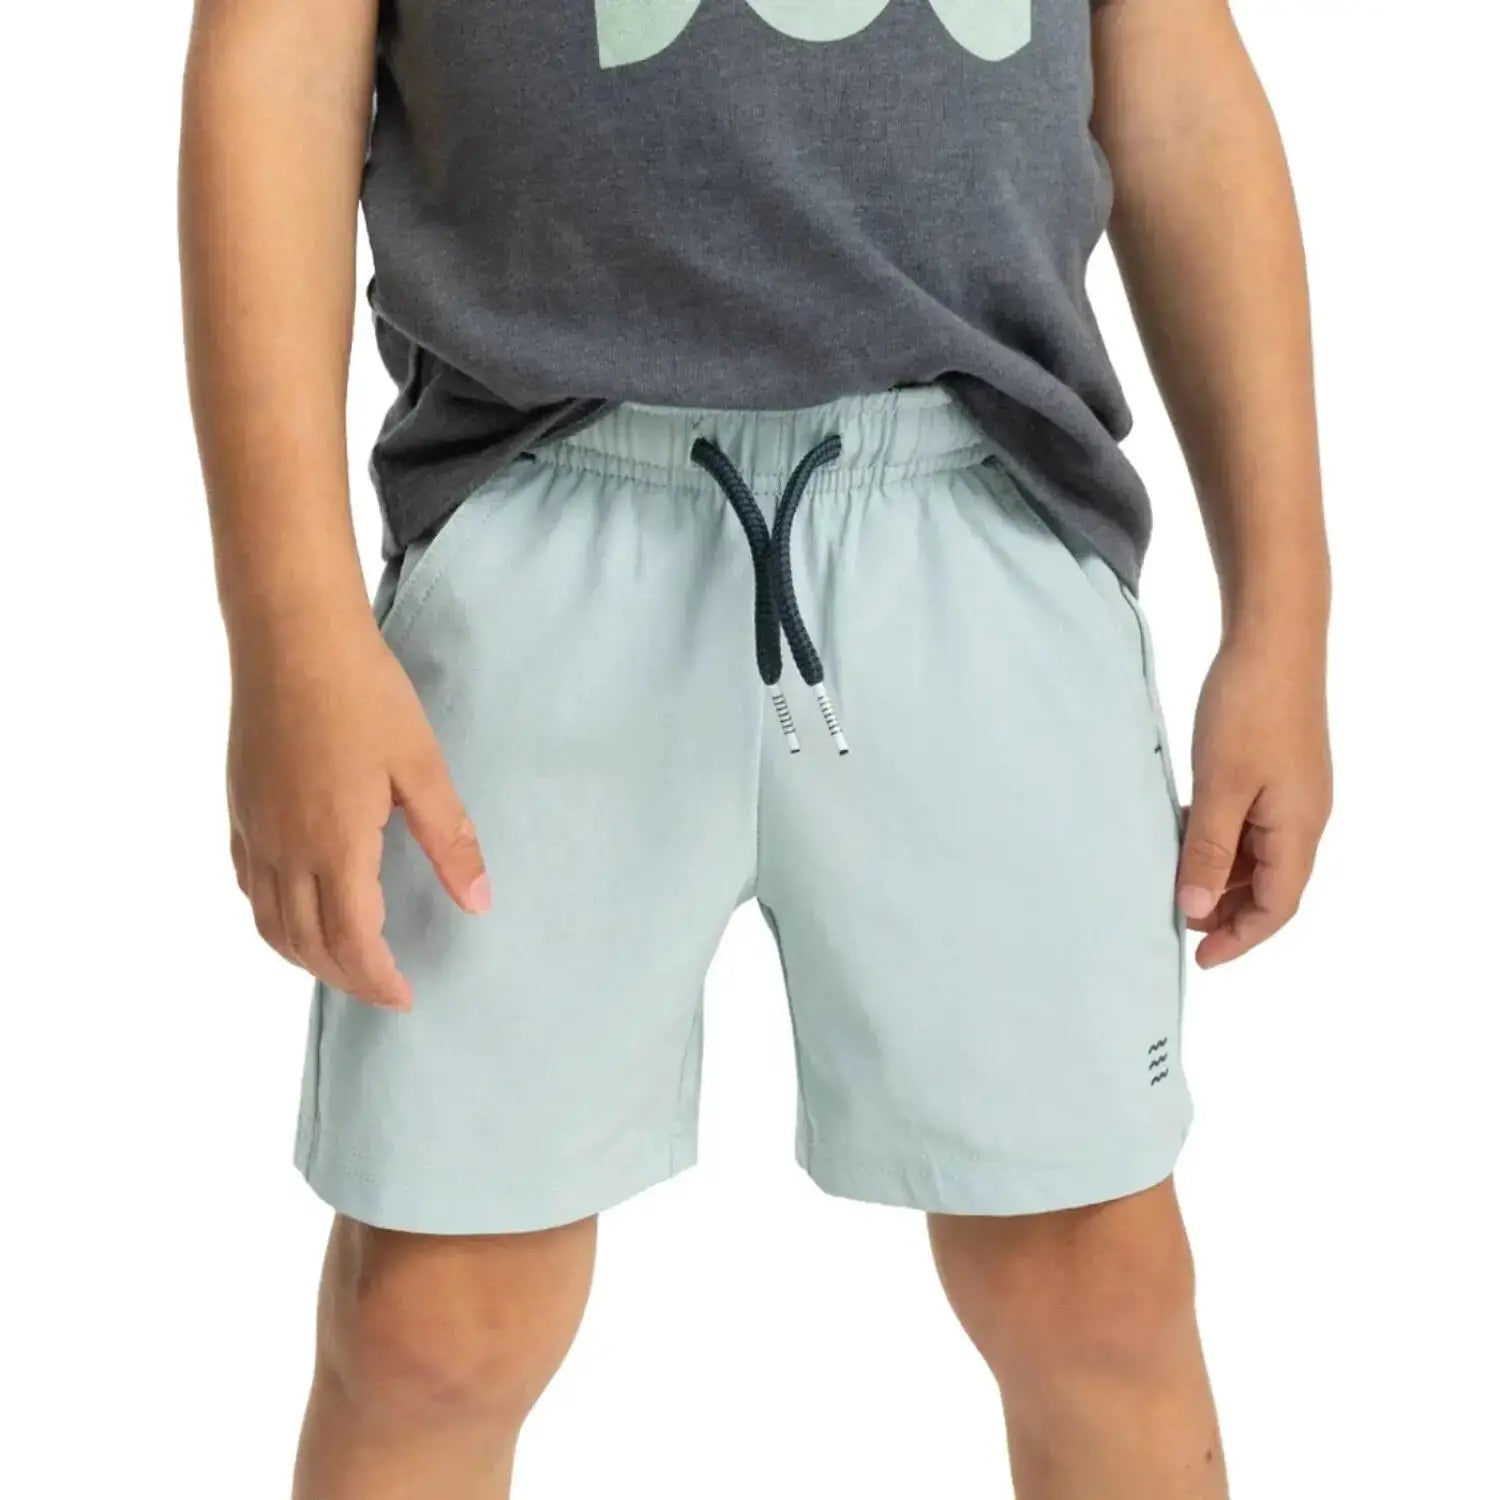 Free Fly Toddler Breeze Short, Sea Glass, front view on model 